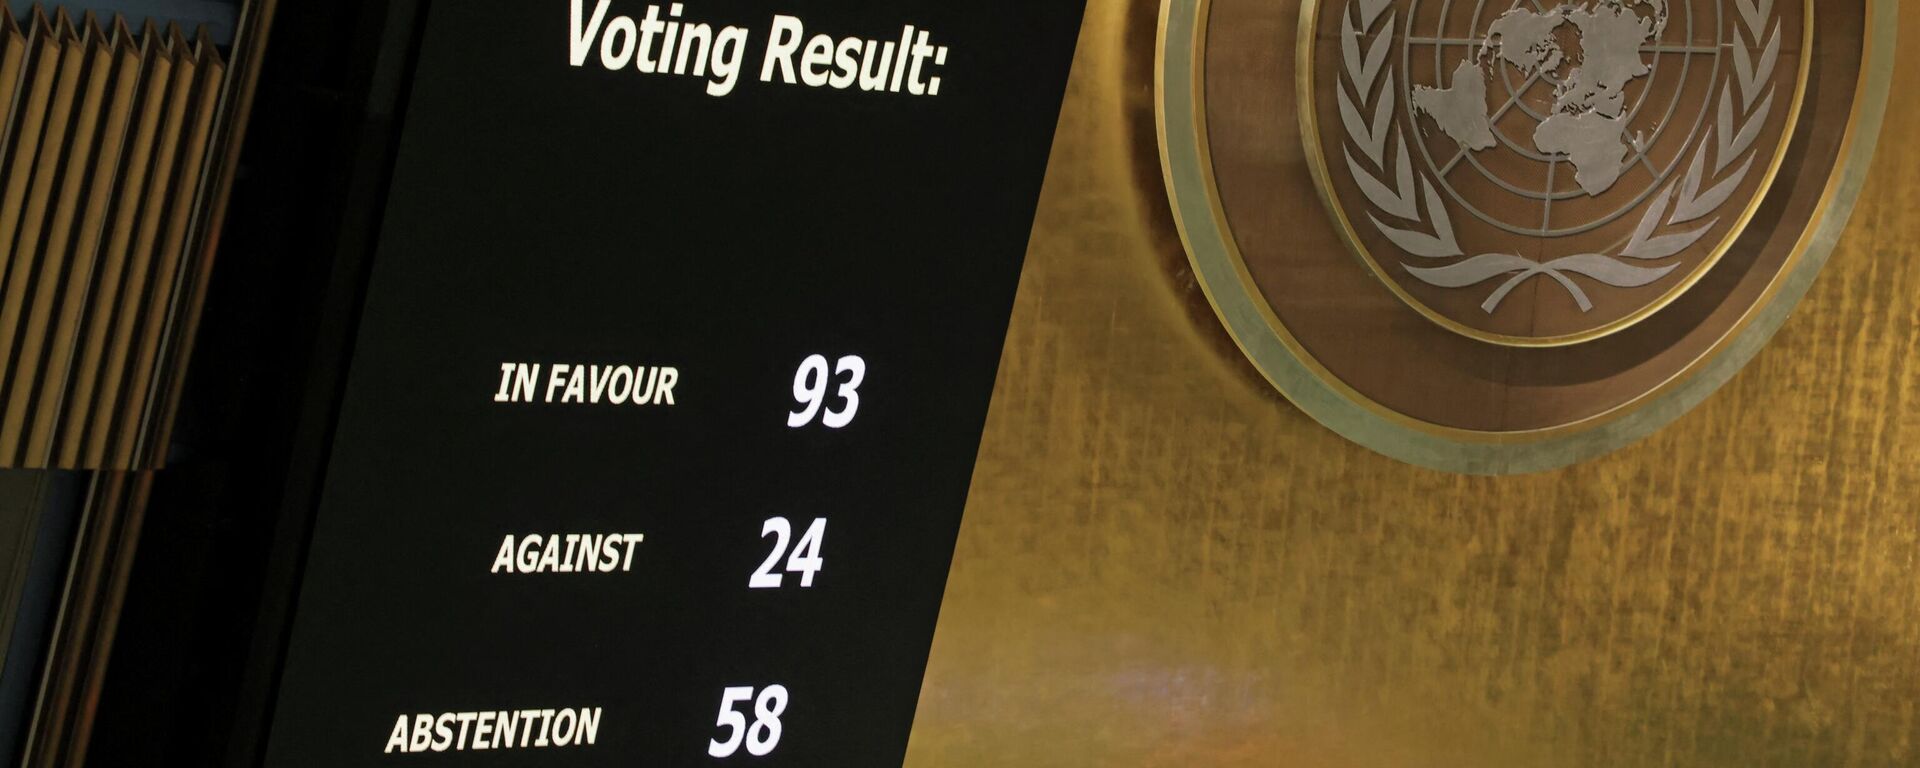 A display shows the results of voting on suspending Russia from United Nations Human Rights Council during an emergency special session of the U.N. General Assembly on Russia's invasion of Ukraine, at the United Nations headquarters in New York City, New York, U.S. April 7, 2022. - Sputnik International, 1920, 09.04.2022